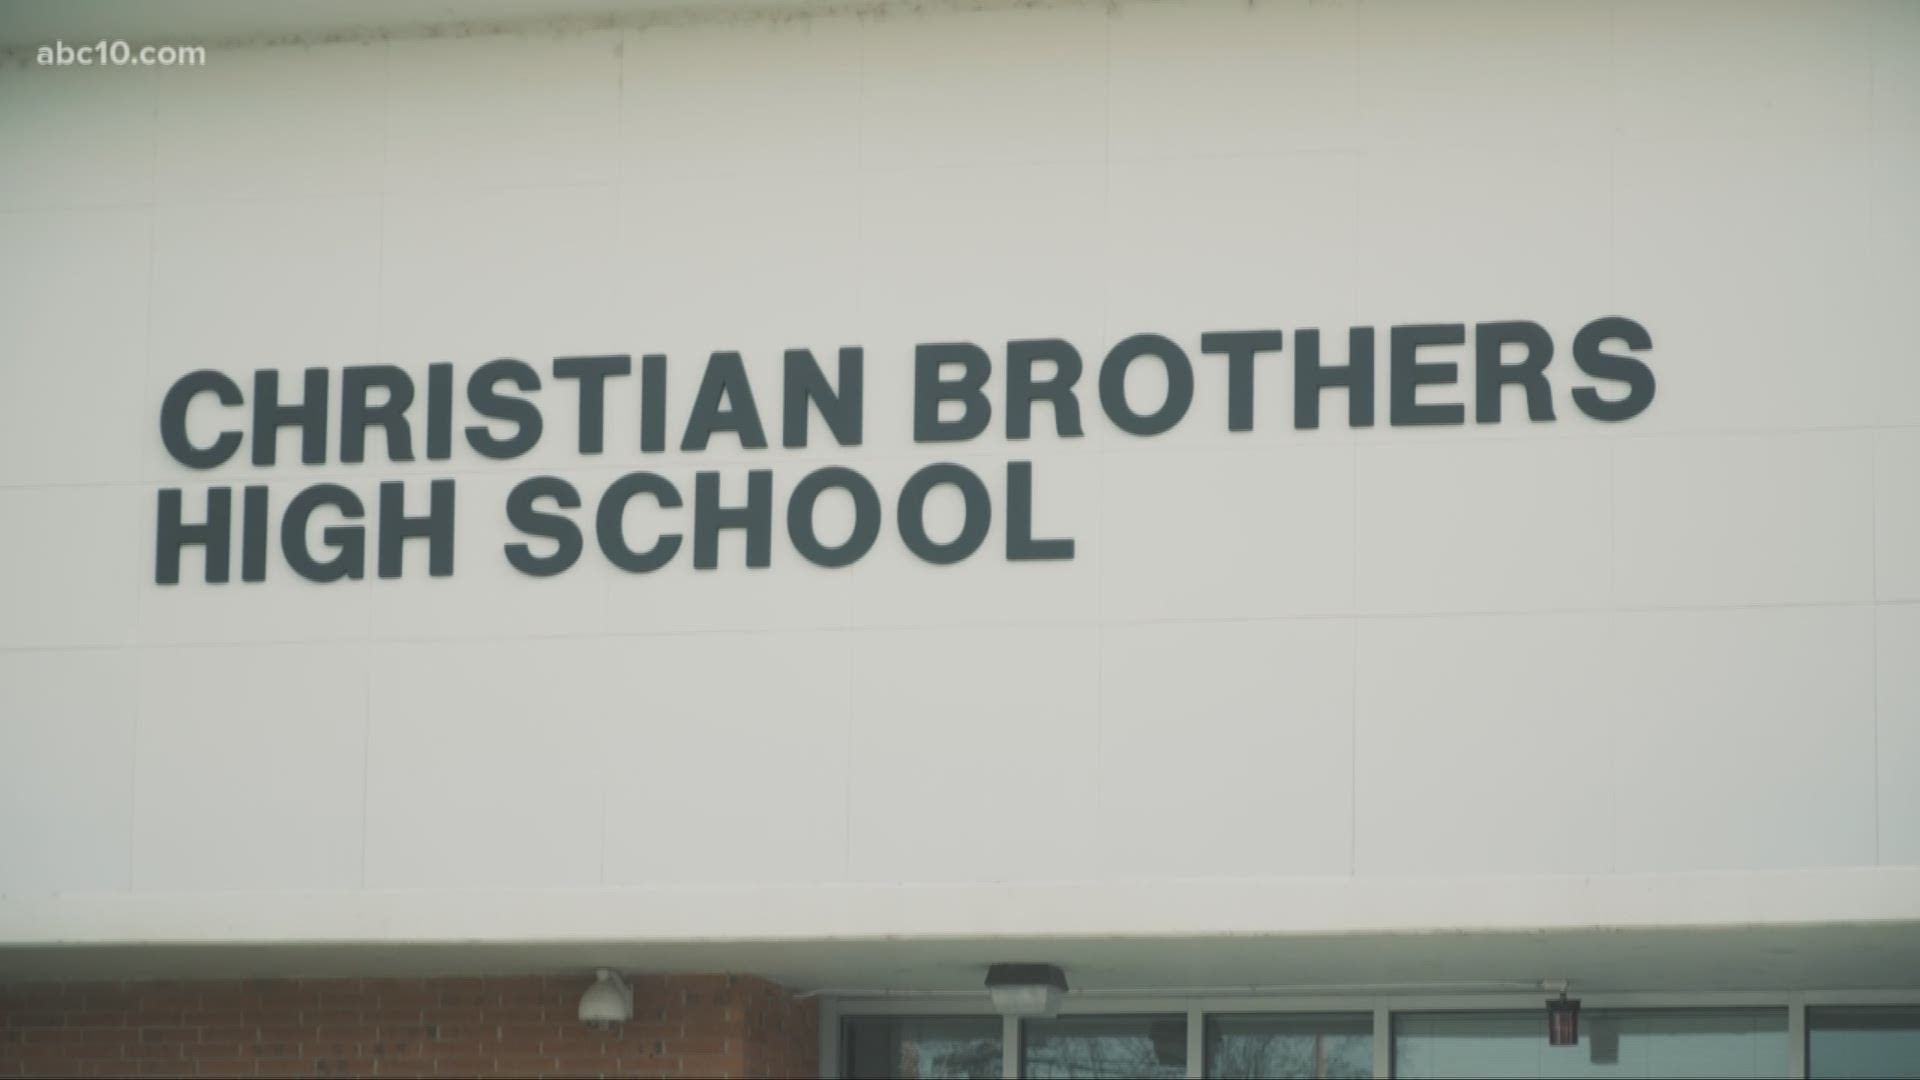 Chris Orr was principal of Christian Brothers High School for two years before he was let go in October.